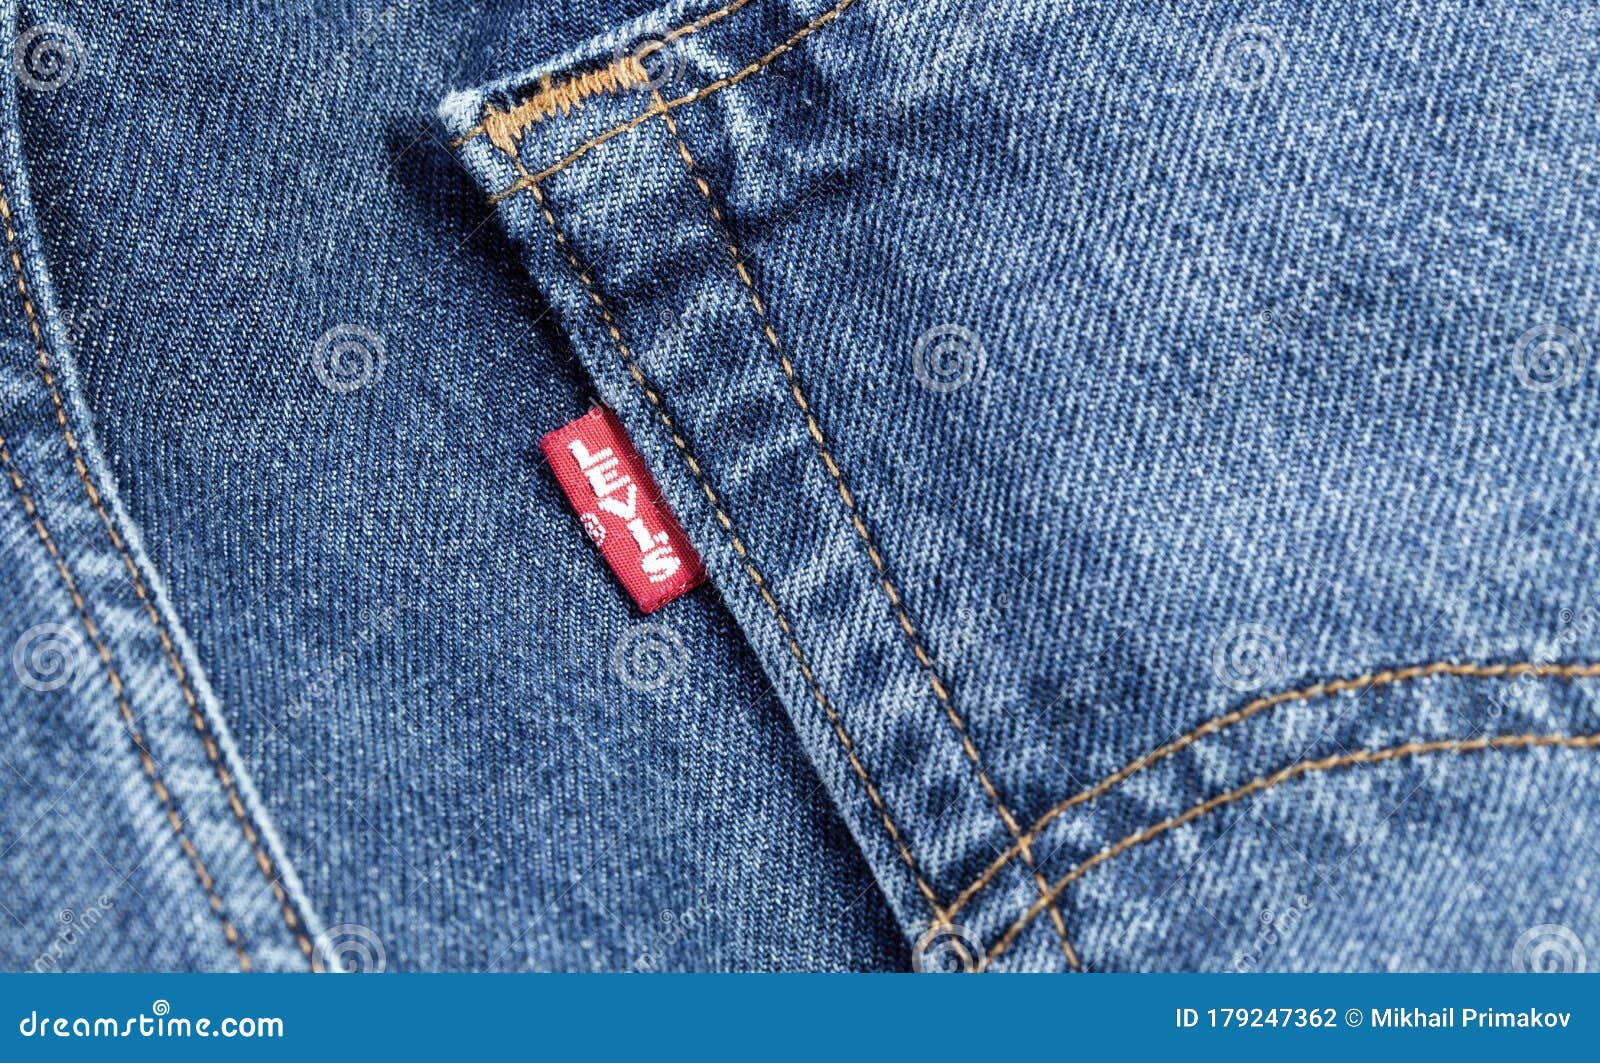 levi's red jeans